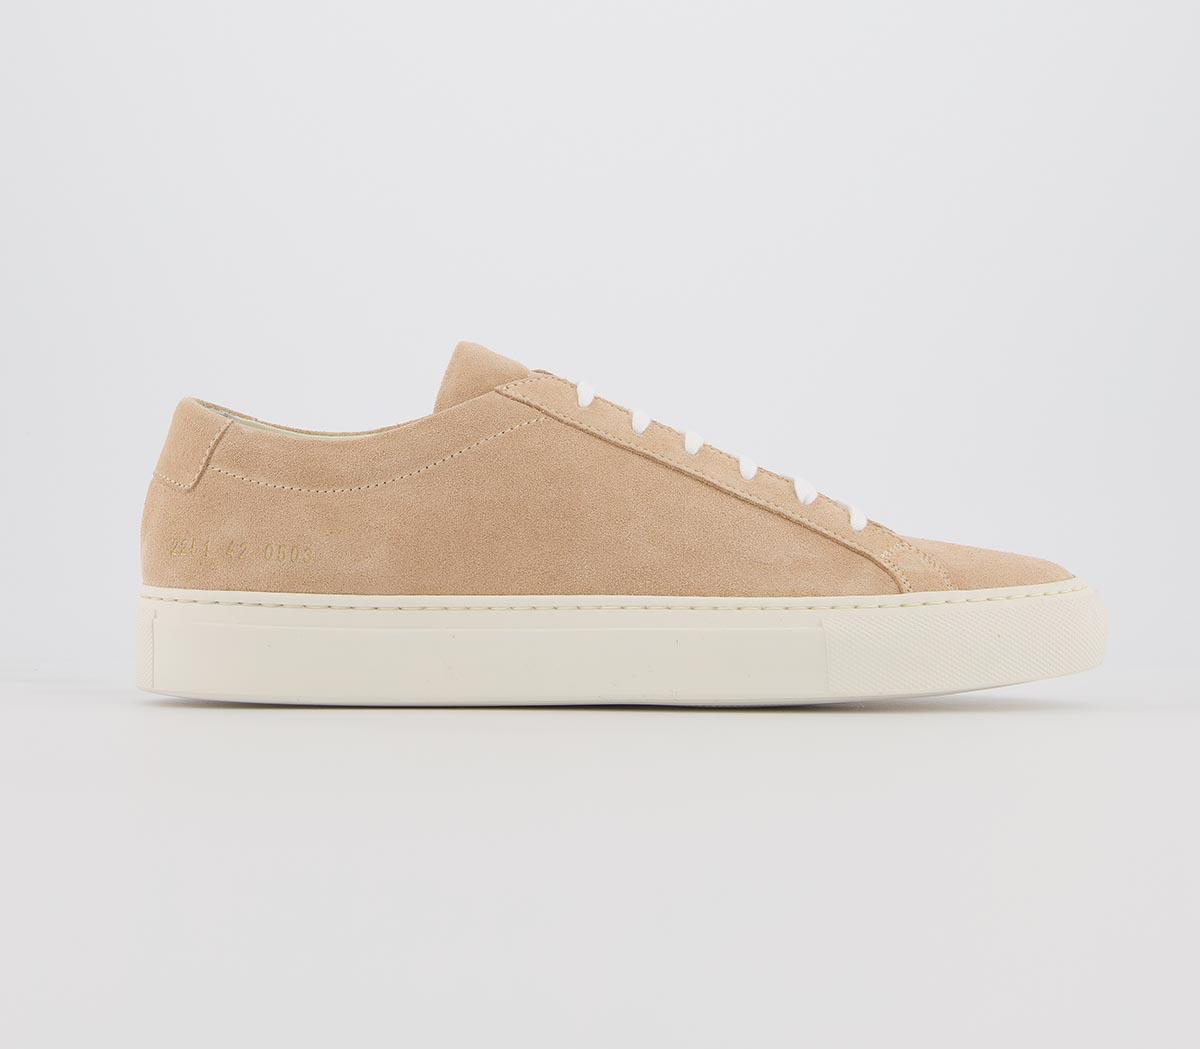 Common ProjectsAchilles Low TrainersAmber Suede